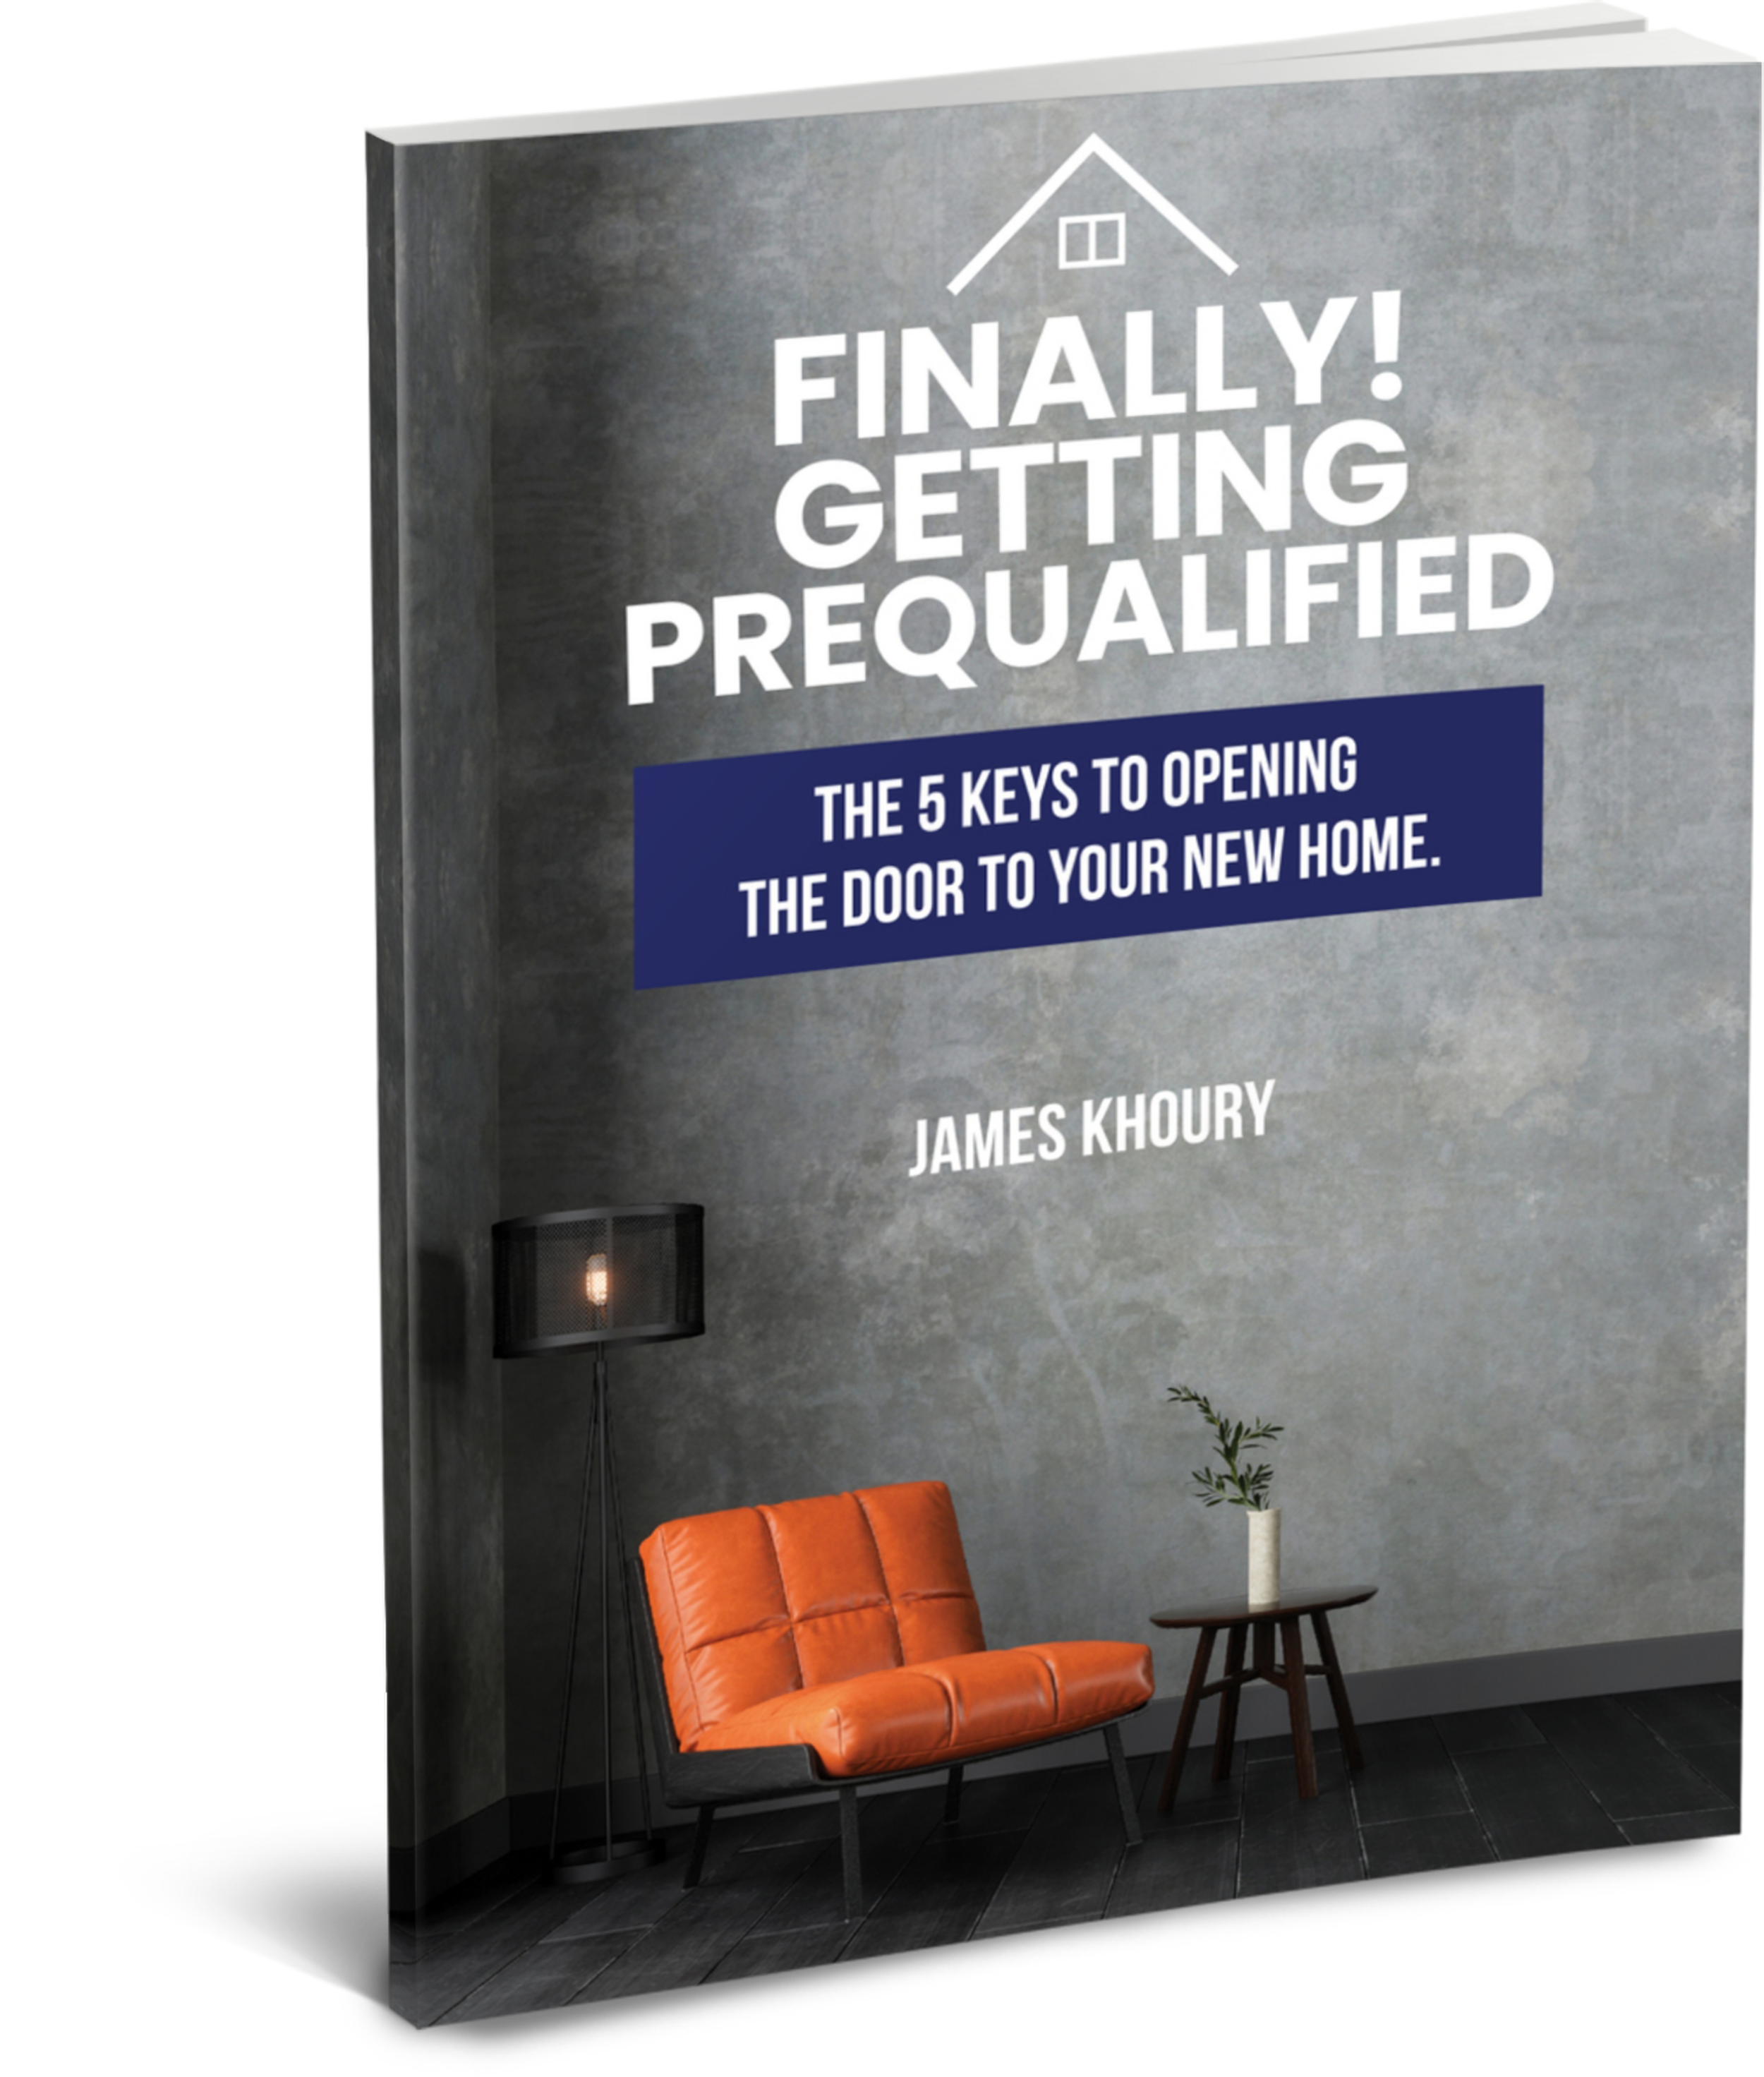  Finally Getting Prequalified James Khoury, a mortgage expert with 18 years of experience, as we dove into simplifying the home buying process for first-time buyers and his book, Finally Getting Prequalified.   Listen in as we delve into the building